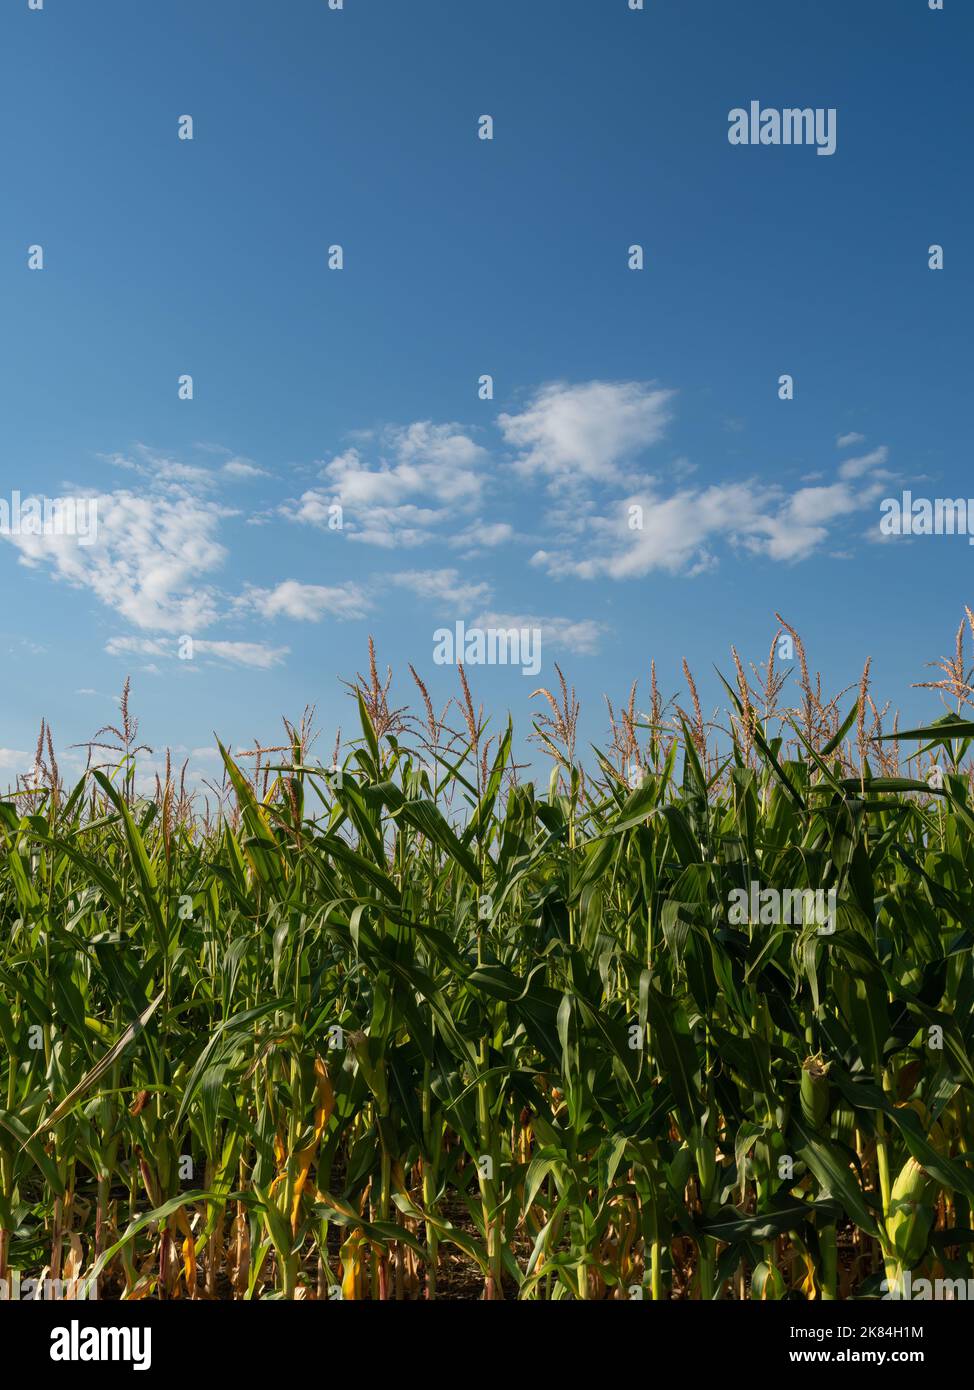 Close up of corn stalks topped with tassels in an agricultural field with blue sky and white clouds above. Image has copy space. Stock Photo